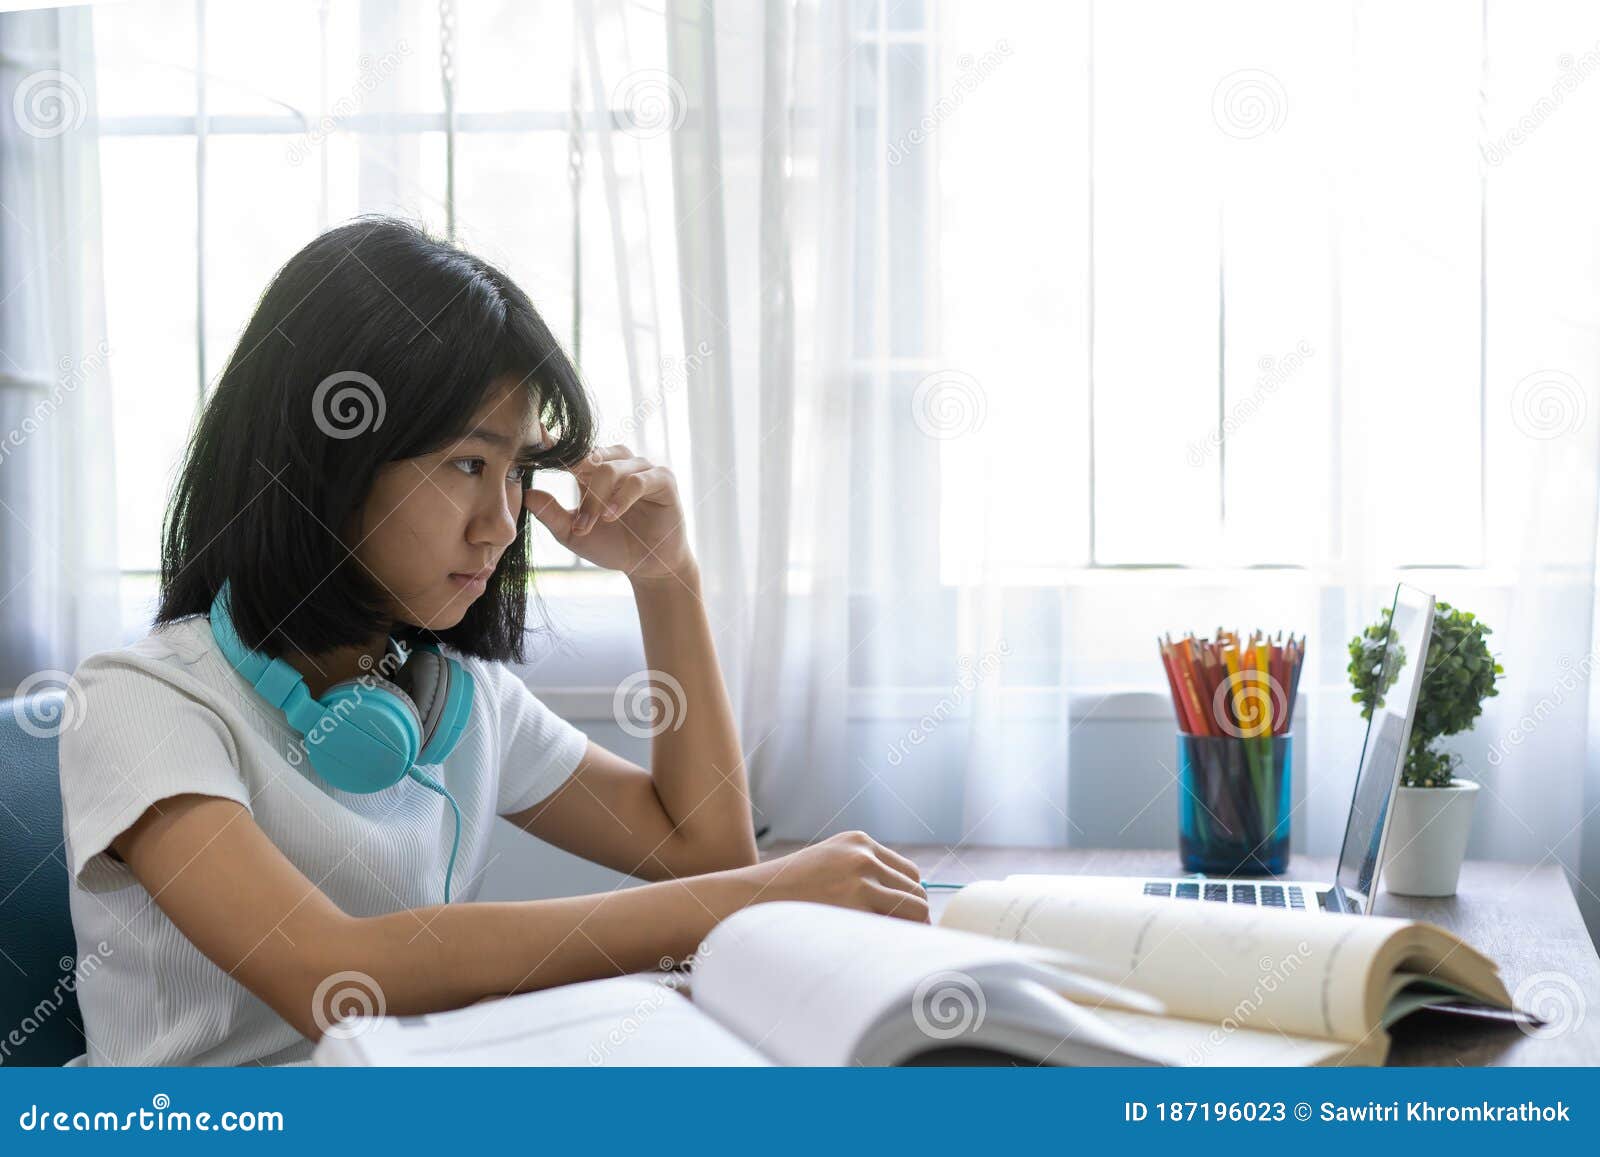 girl thinking about homework